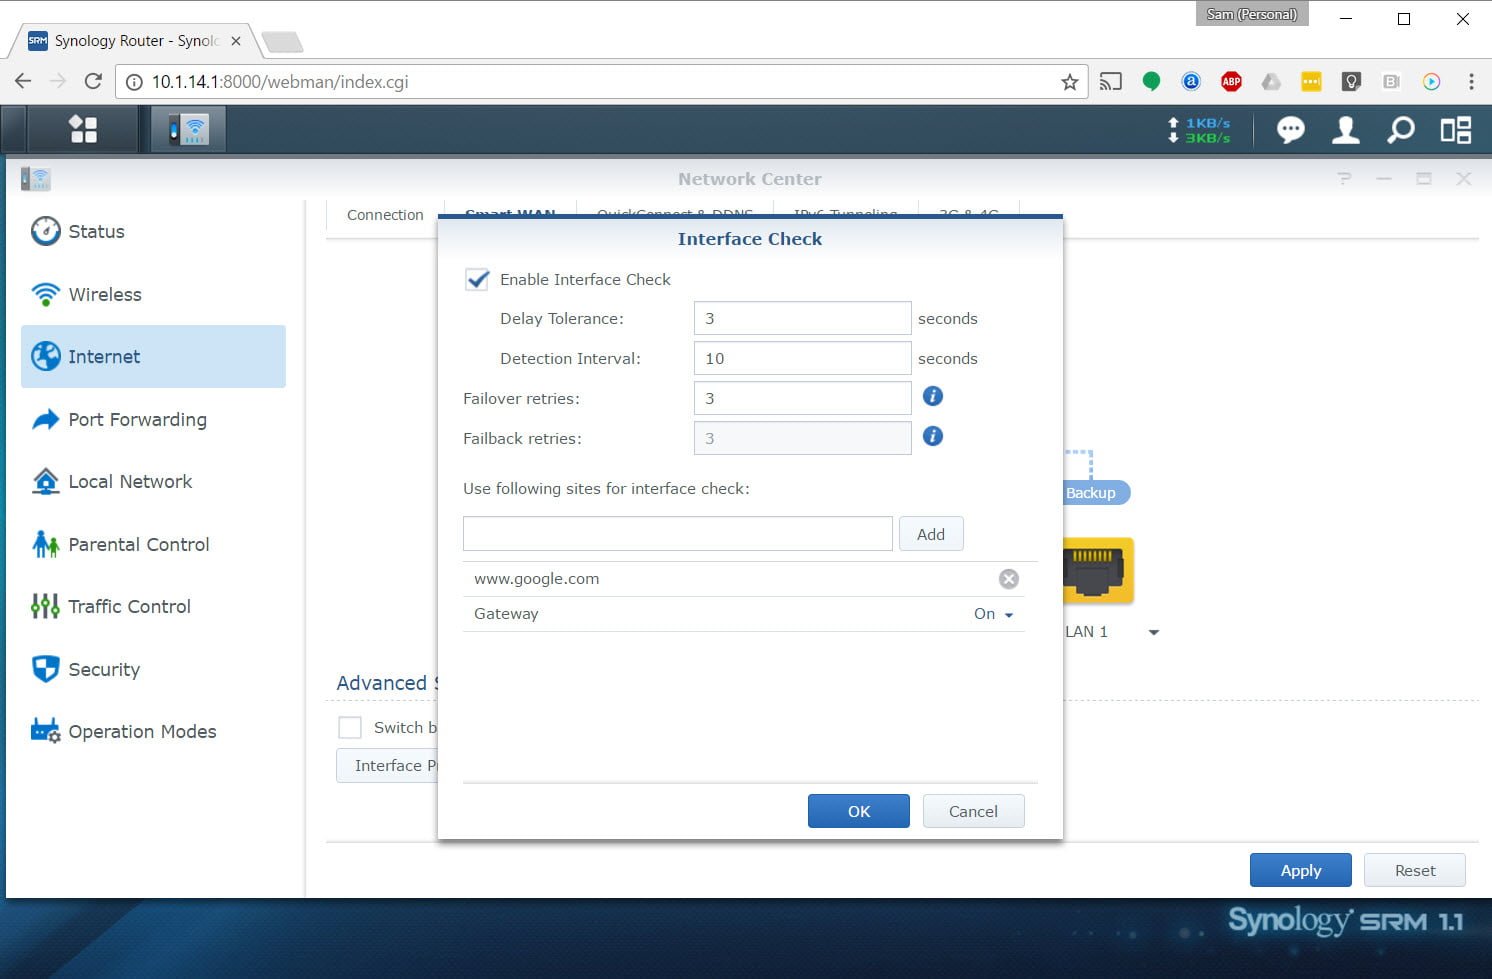 Synology connect. Synology Интерфейс. Synology chat. Synology shortcut. Synology Reverse proxy Router.